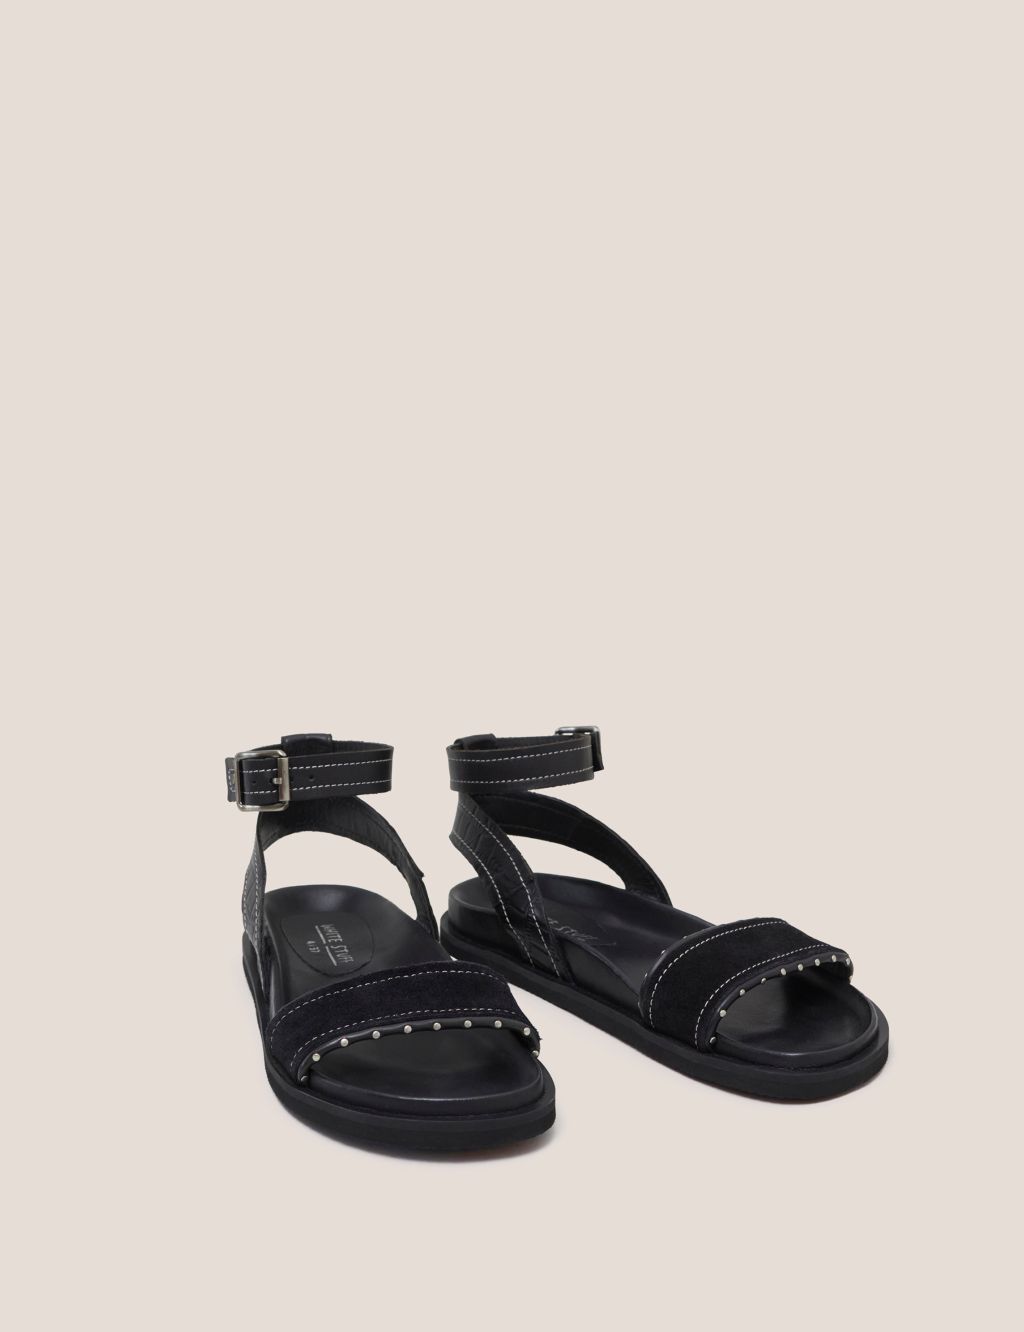 Leather Buckle Ankle Strap Flat Sandals image 2